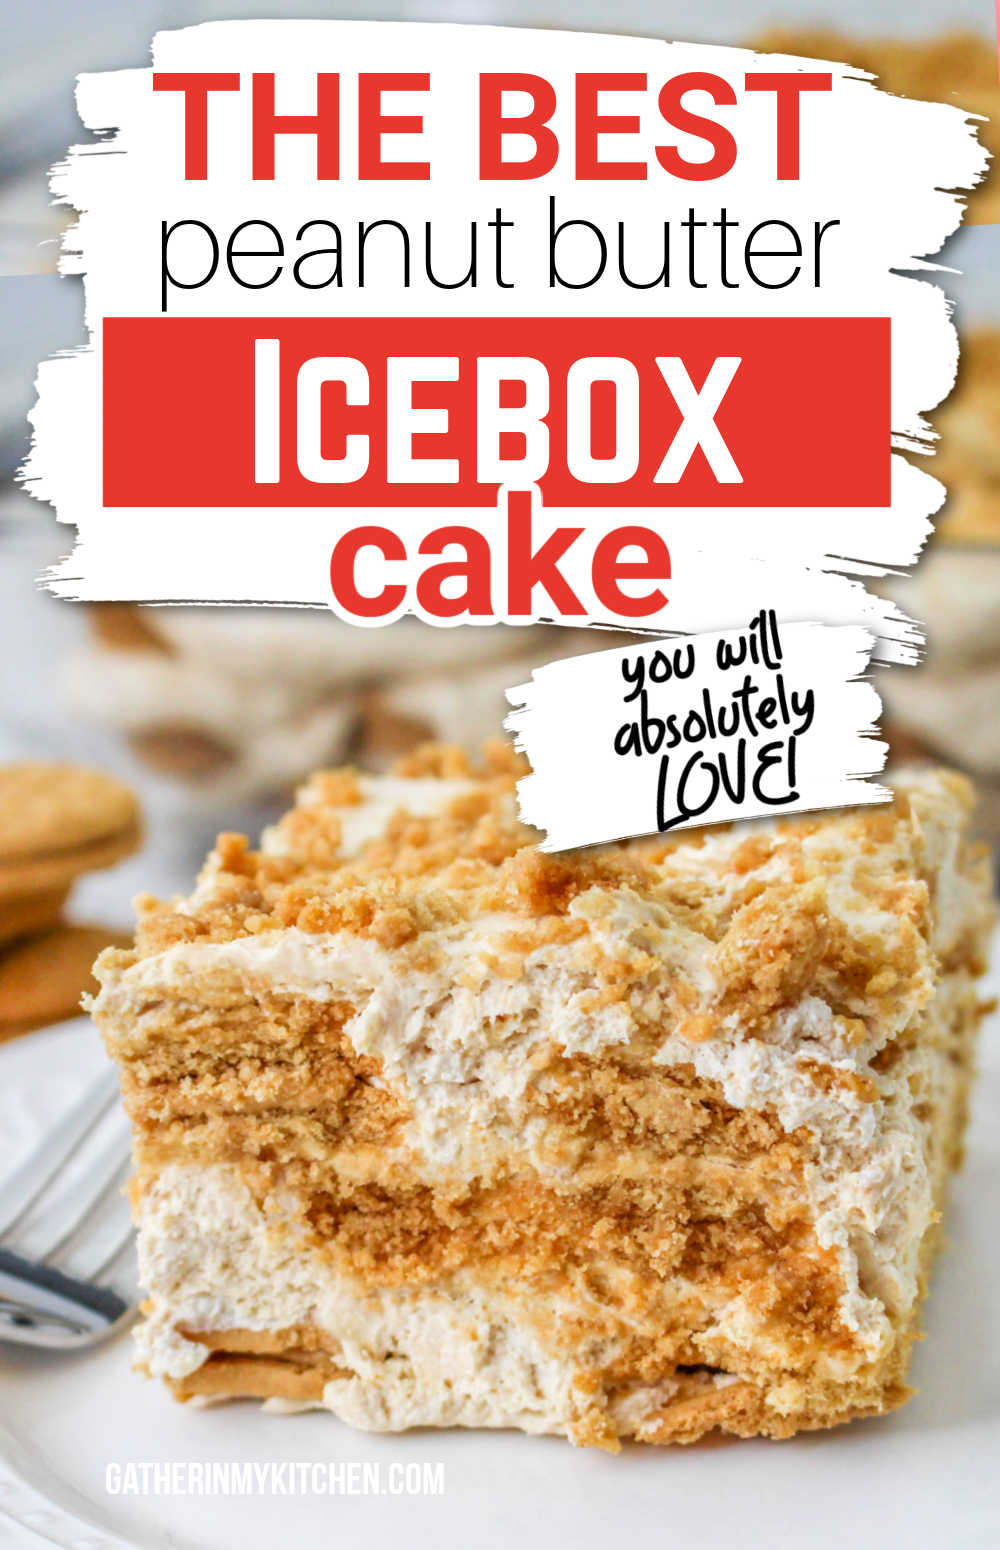 Pin image: top says "the best peanut butter ice box cake you'll absolutely love!" with a pic of a piece of cake on a plate.